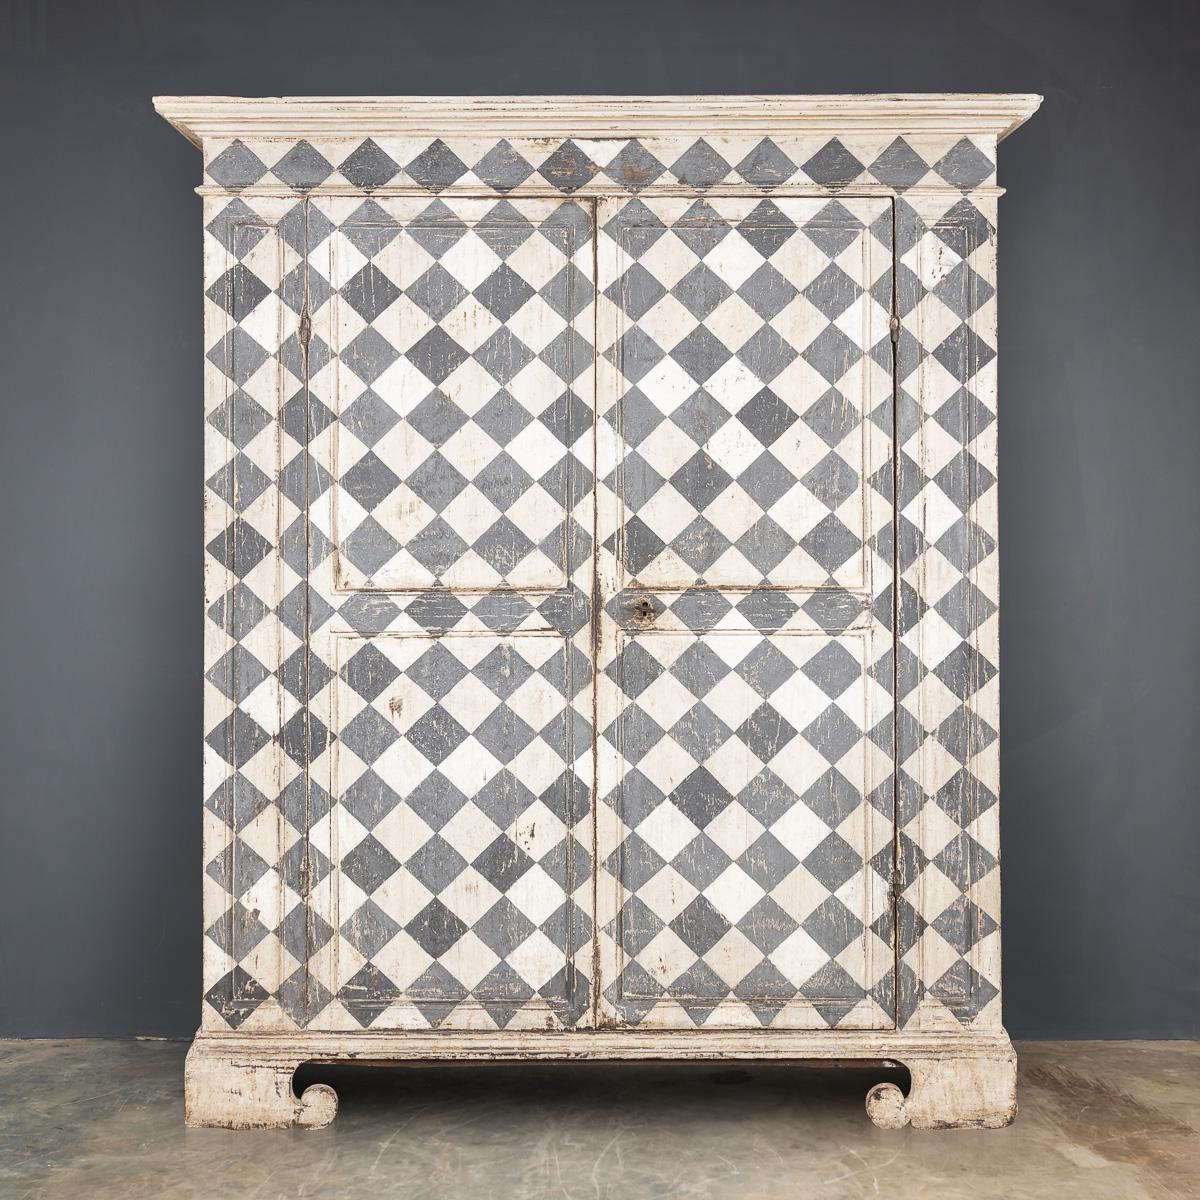 Antique mid-19th Century Italian beautiful and rustic painted pine armoire, decorated with a decorative pattern in white and grey, has its original lock and key.

CONDITION
In Good Condition - Wear consistent with age.

SIZE
Width: 166cm
Depth: